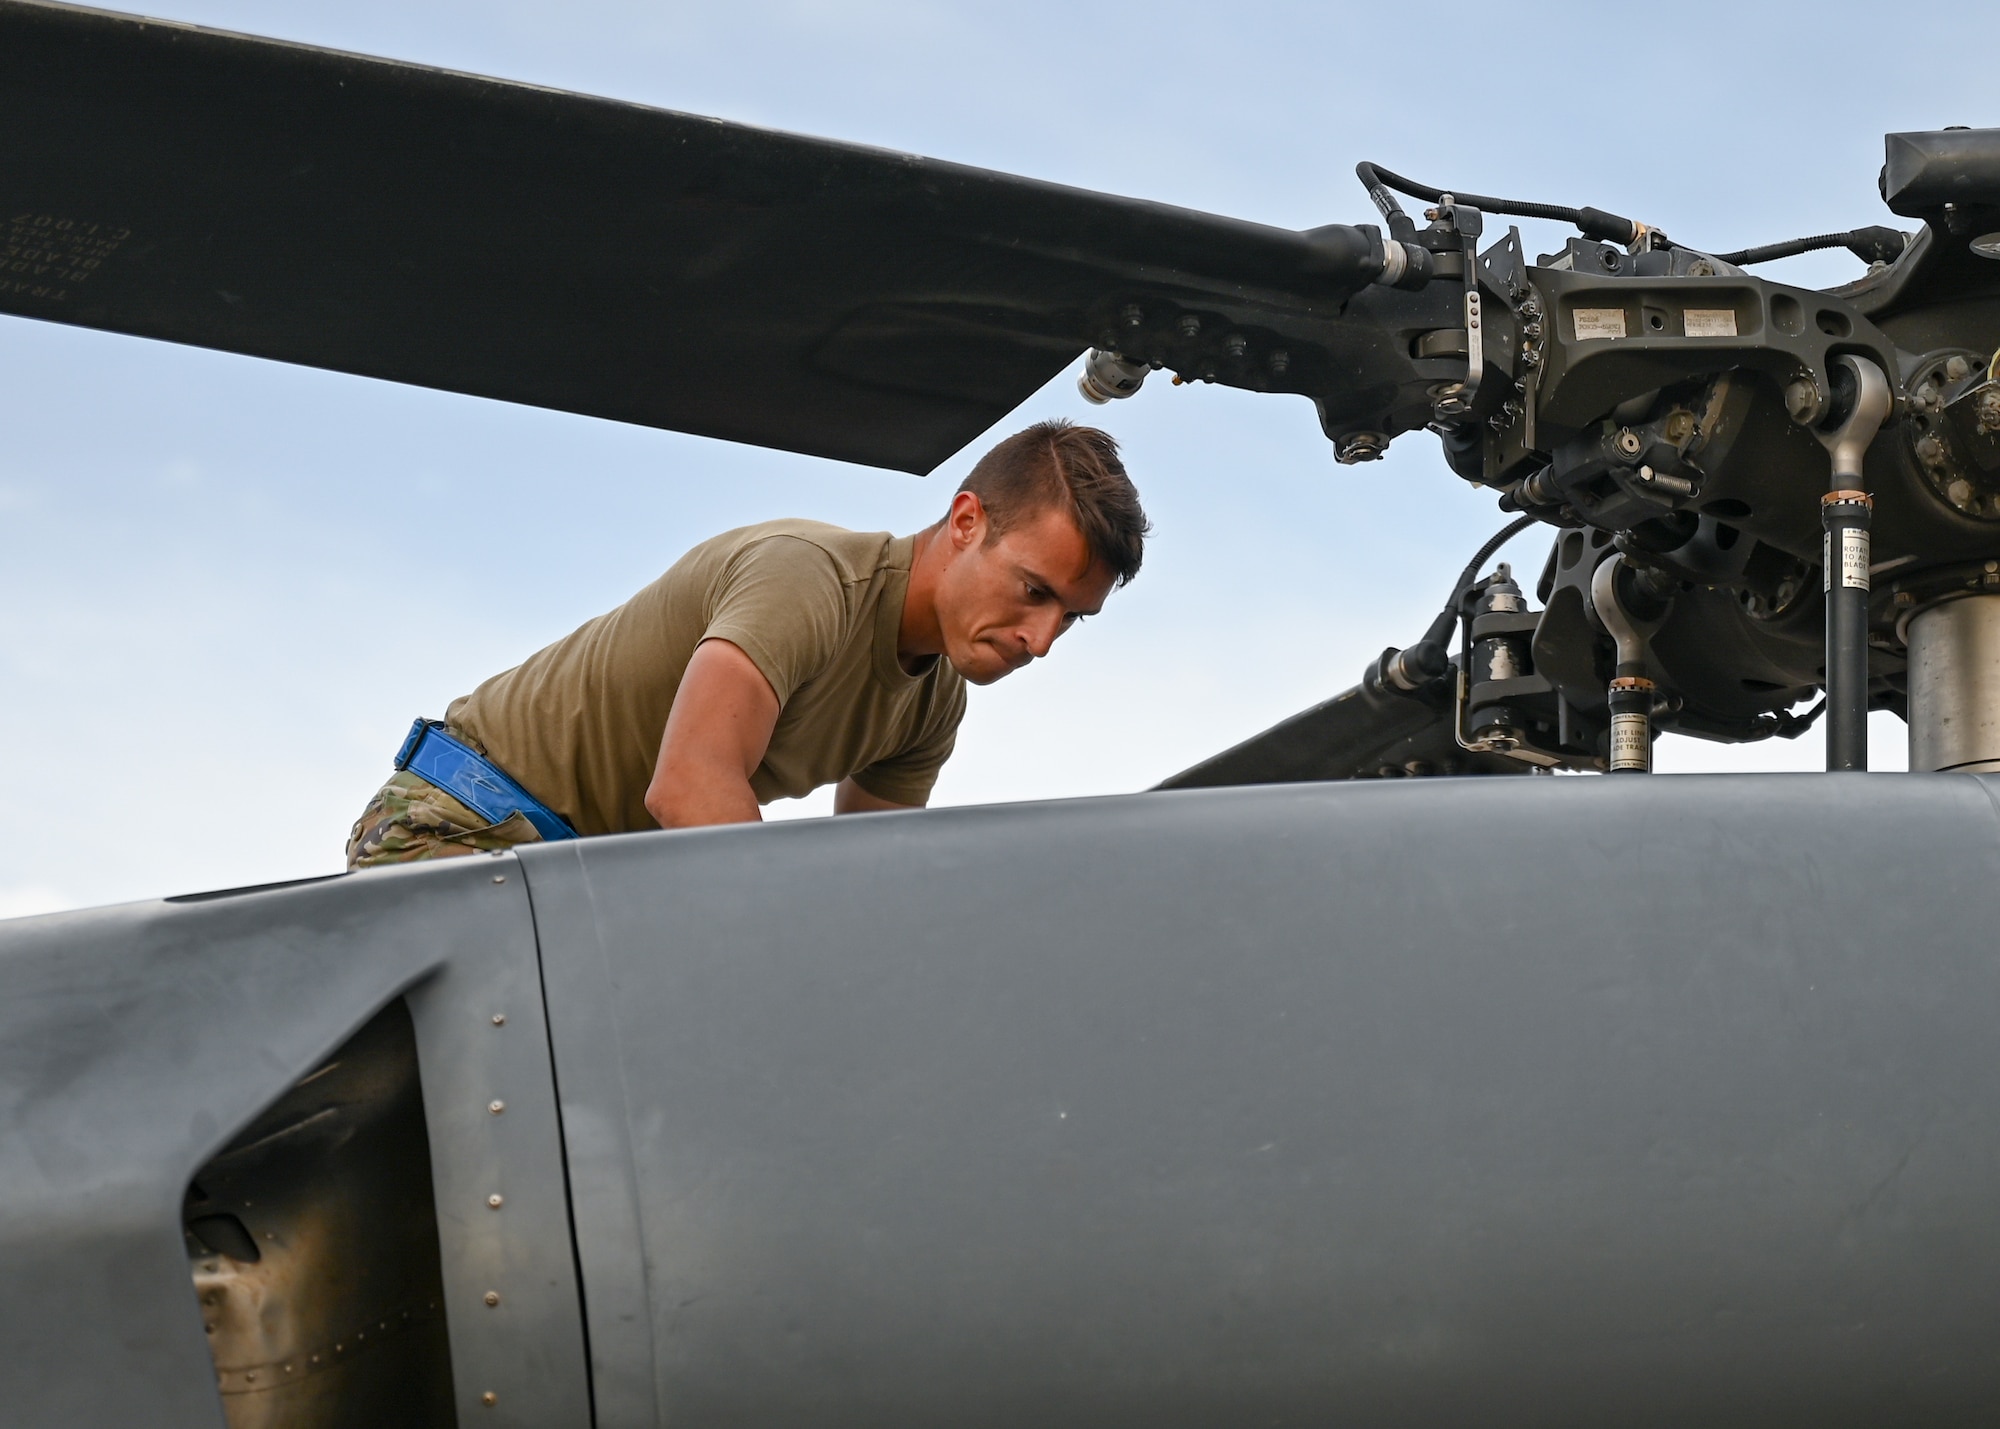 A man in a military uniform works on the top of a helicopter.